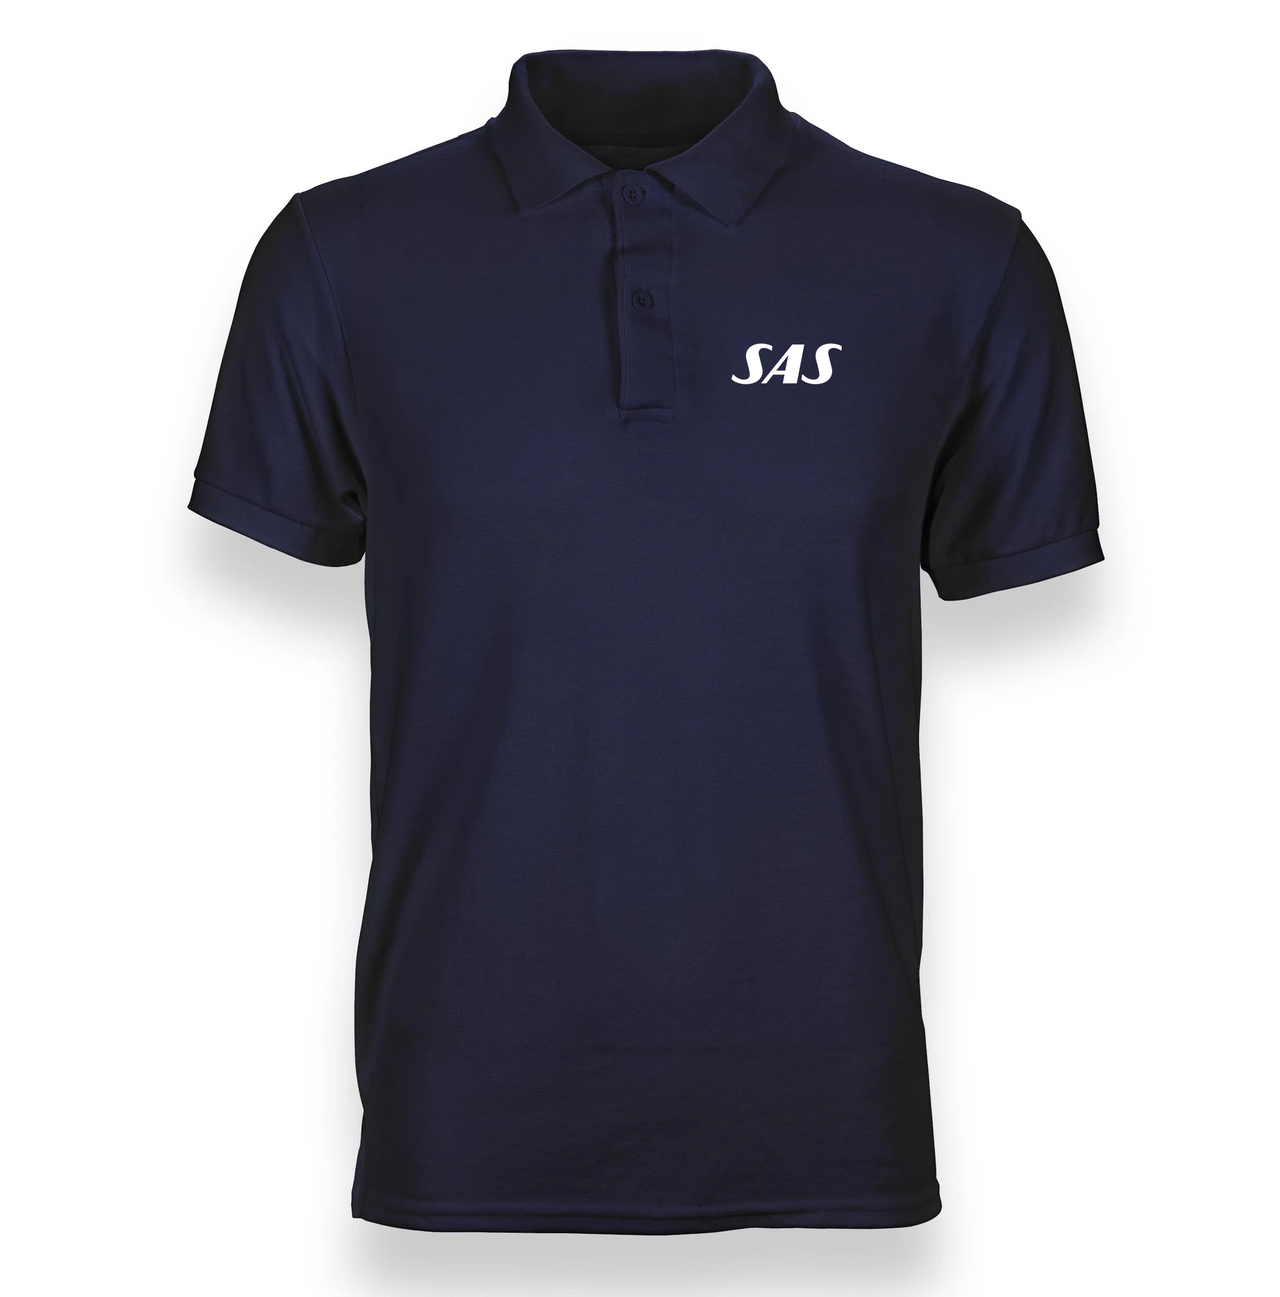 SAS AIRLINES POLO T-SHIRT